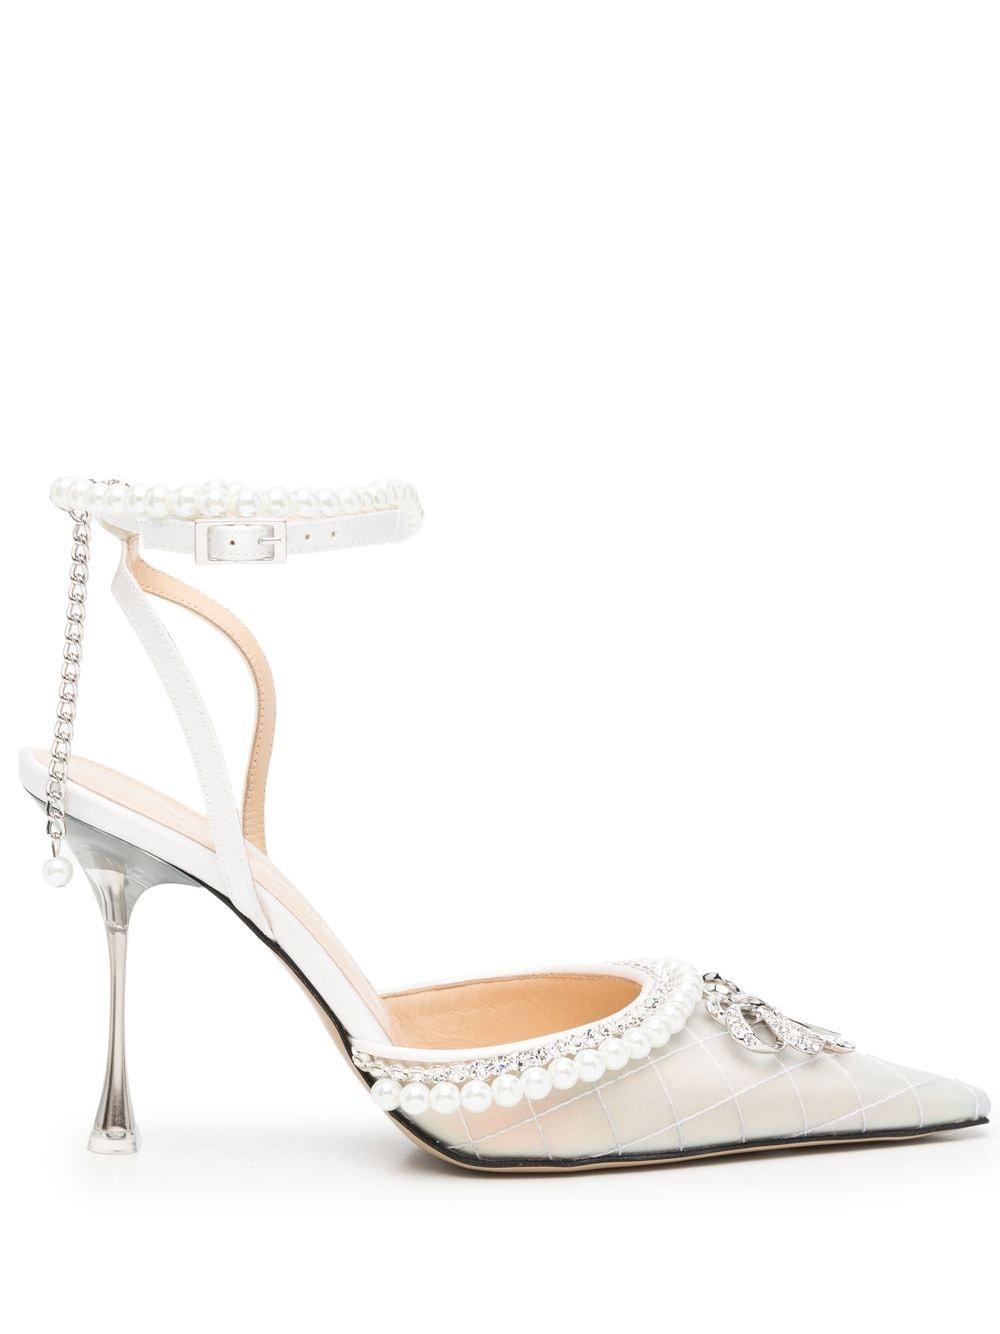 Mach & Mach Faux Pearl-embellished 110mm Heel Pumps in White | Lyst